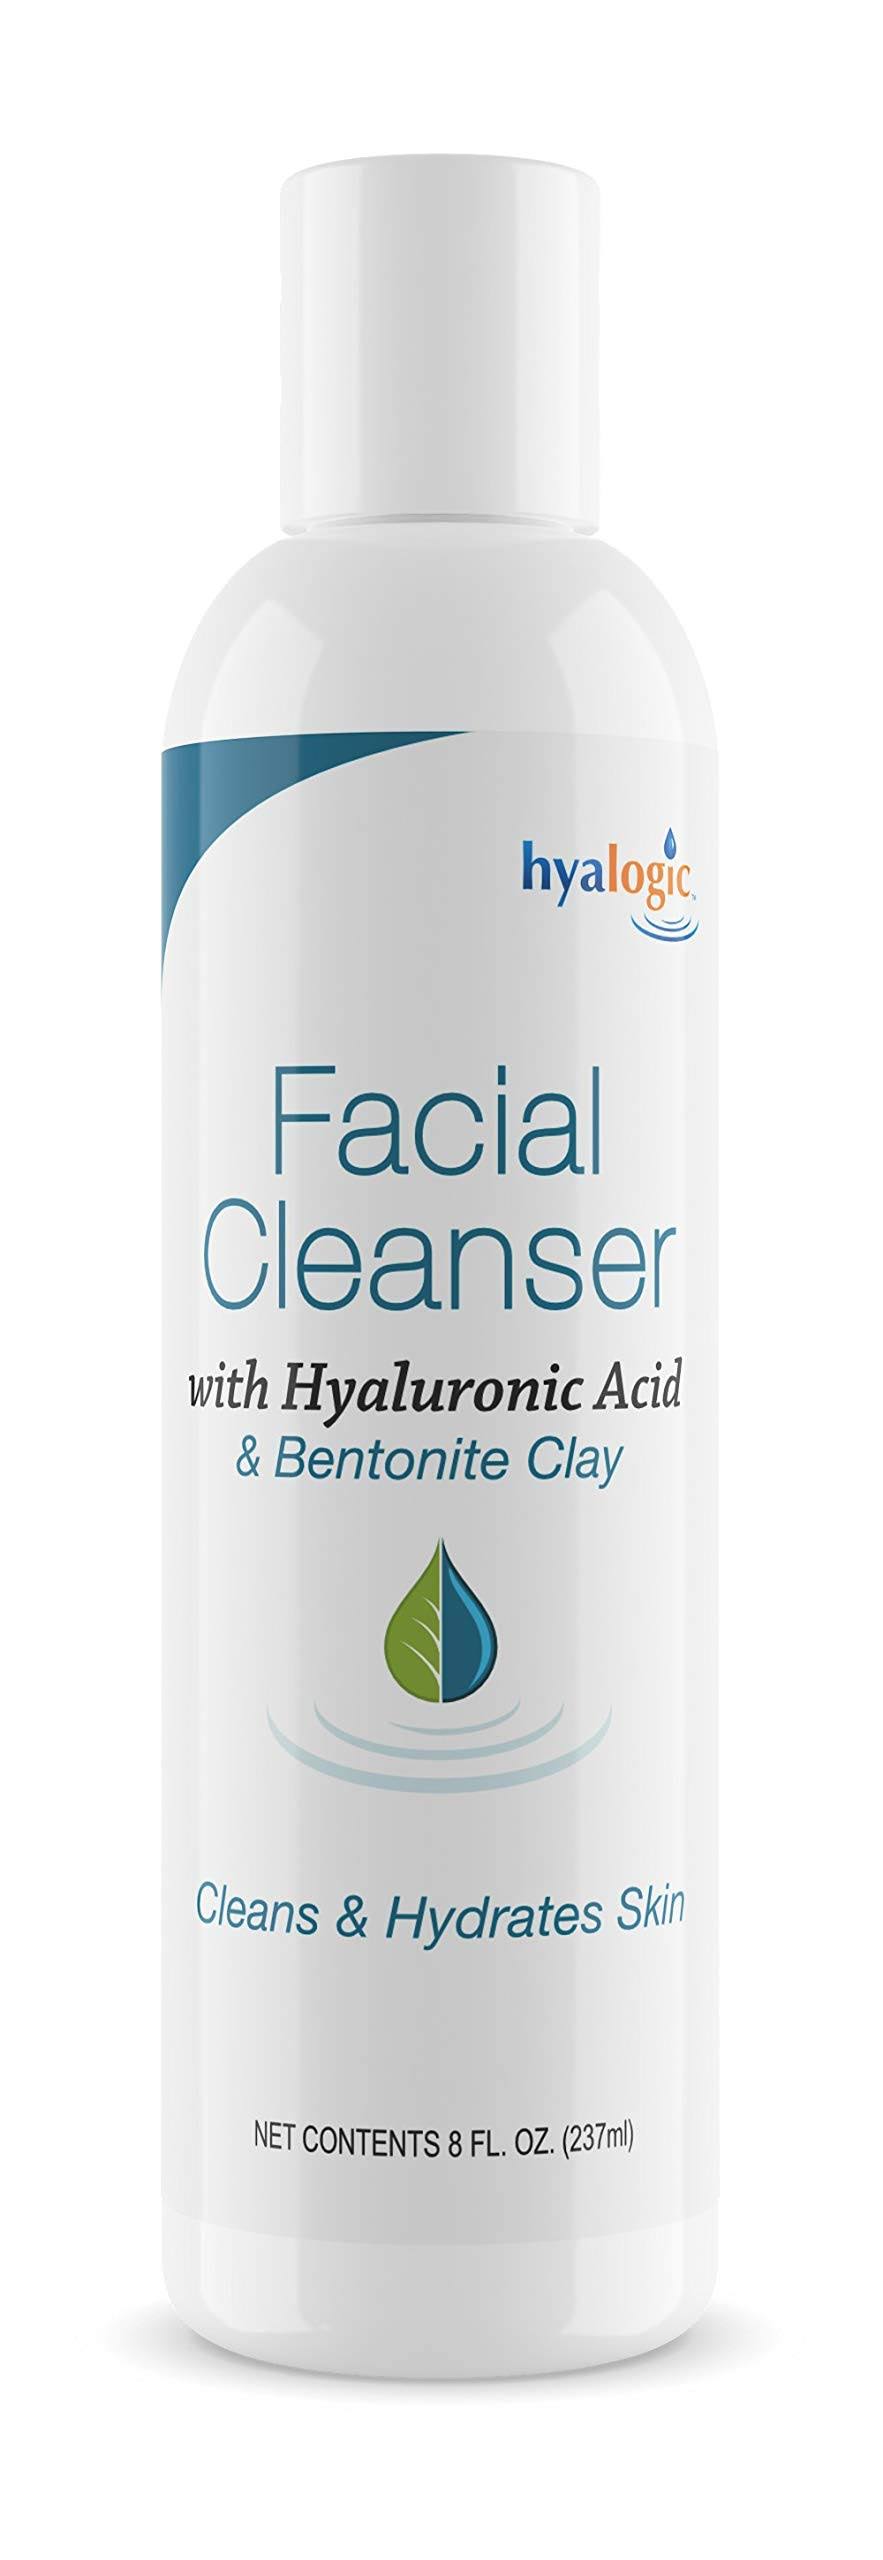 Hyalogic Facial Cleanser with Hyaluronic Acid